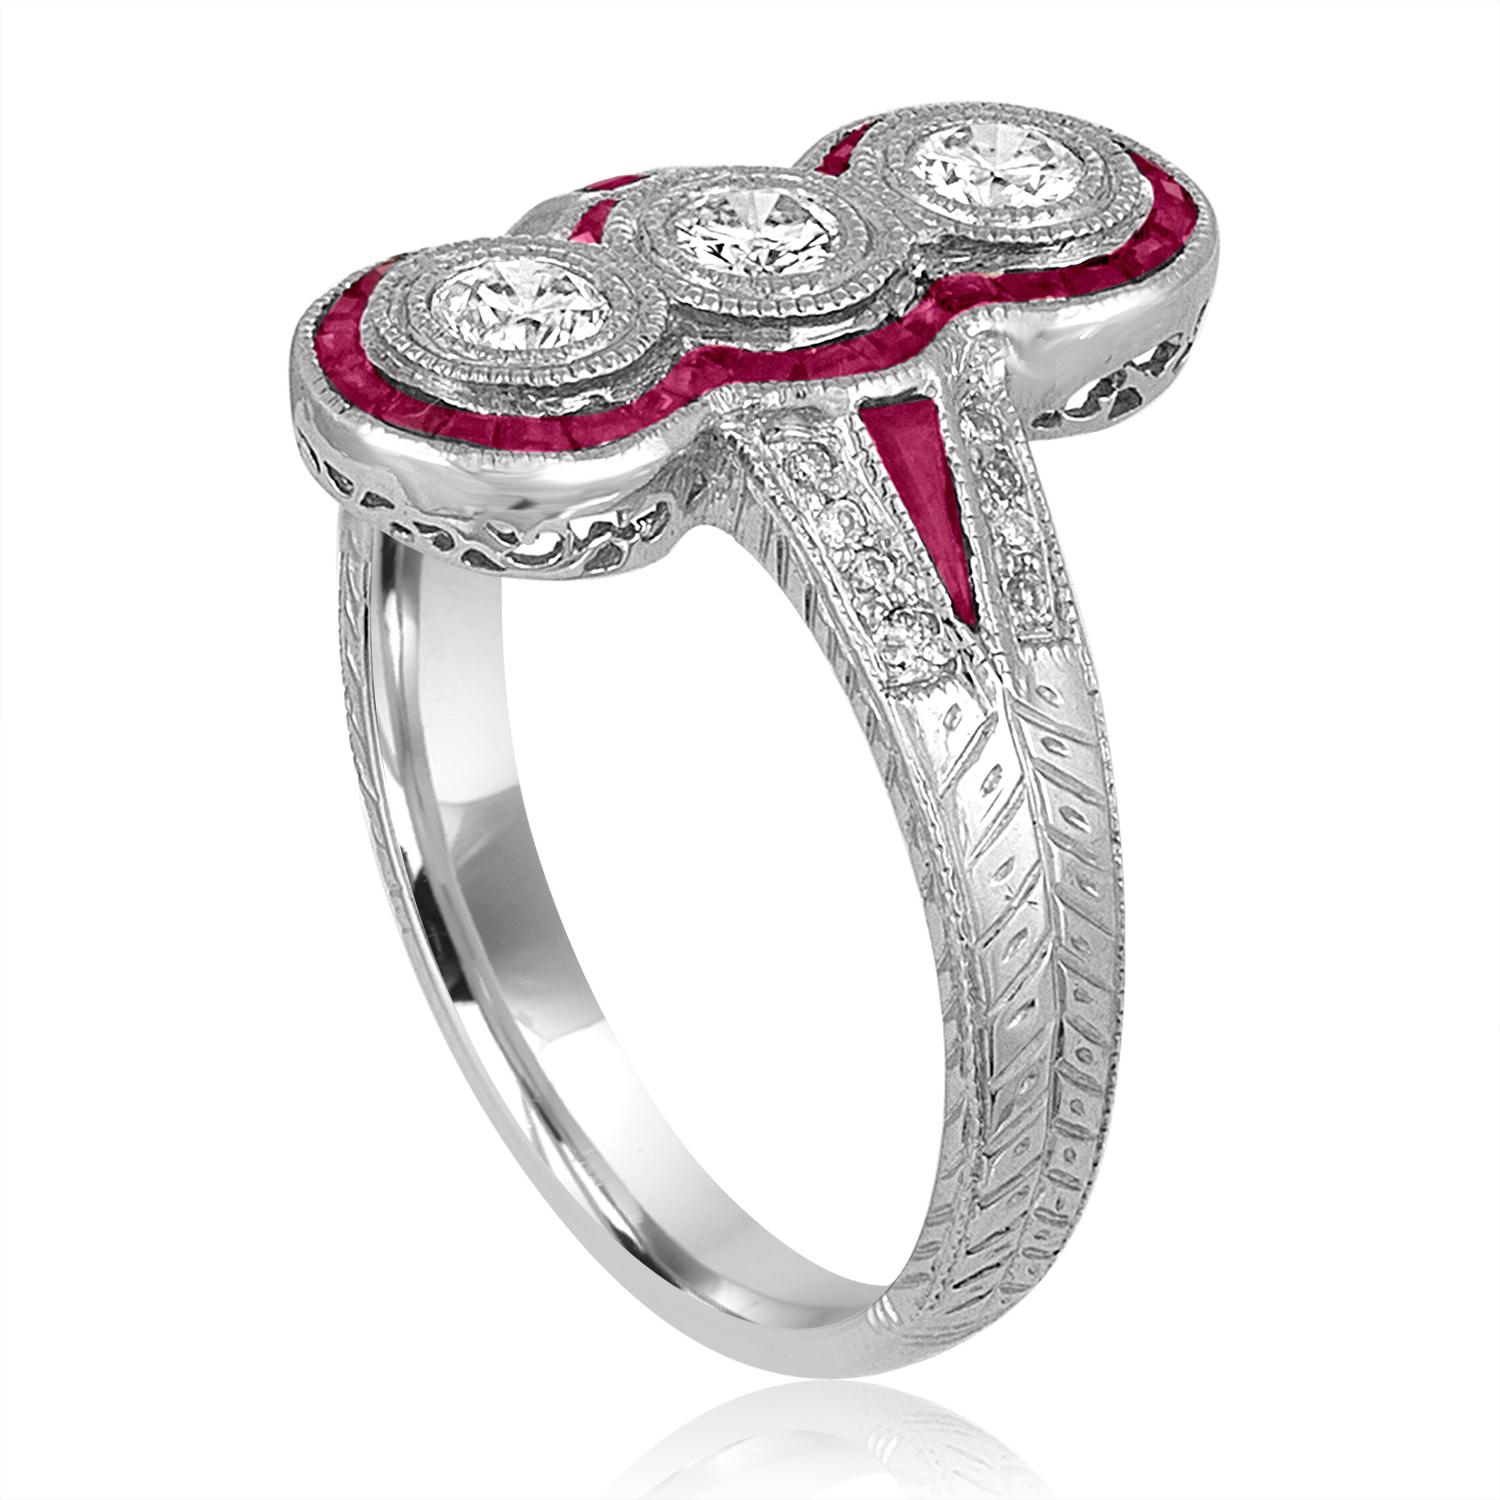 Art Deco Revival Style Ring
The ring is 18K White Gold
There are 0.55 Carats in Diamonds H SI
There are 0.55 Carats in Rubies
The ring is a size 6.50, sizable
The ring weighs 4.4 grams